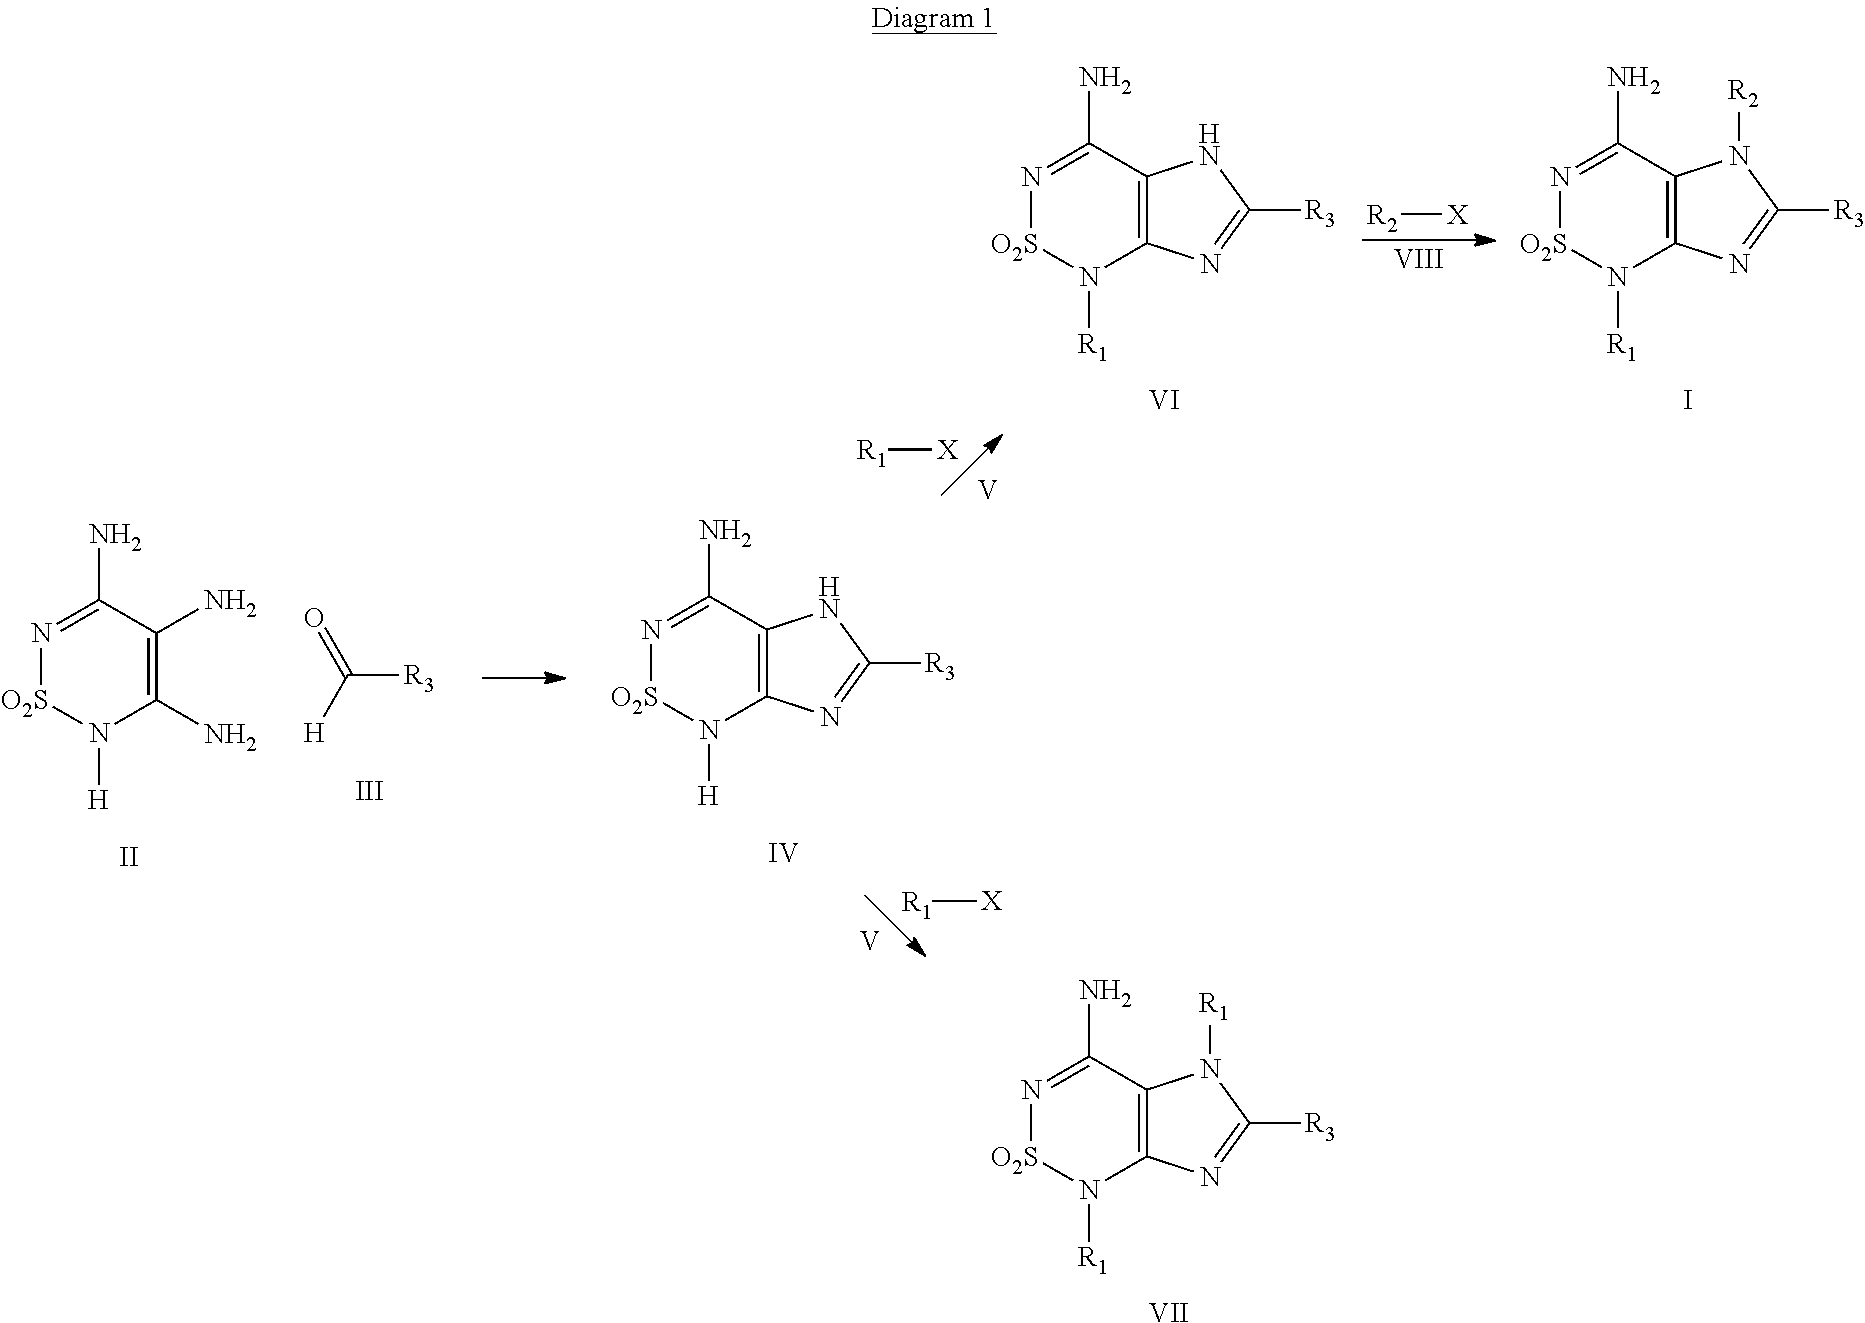 Family of antichagasics derived from imidazo[4,5-C][1,2,6]thiadiazine 2,2-dioxide